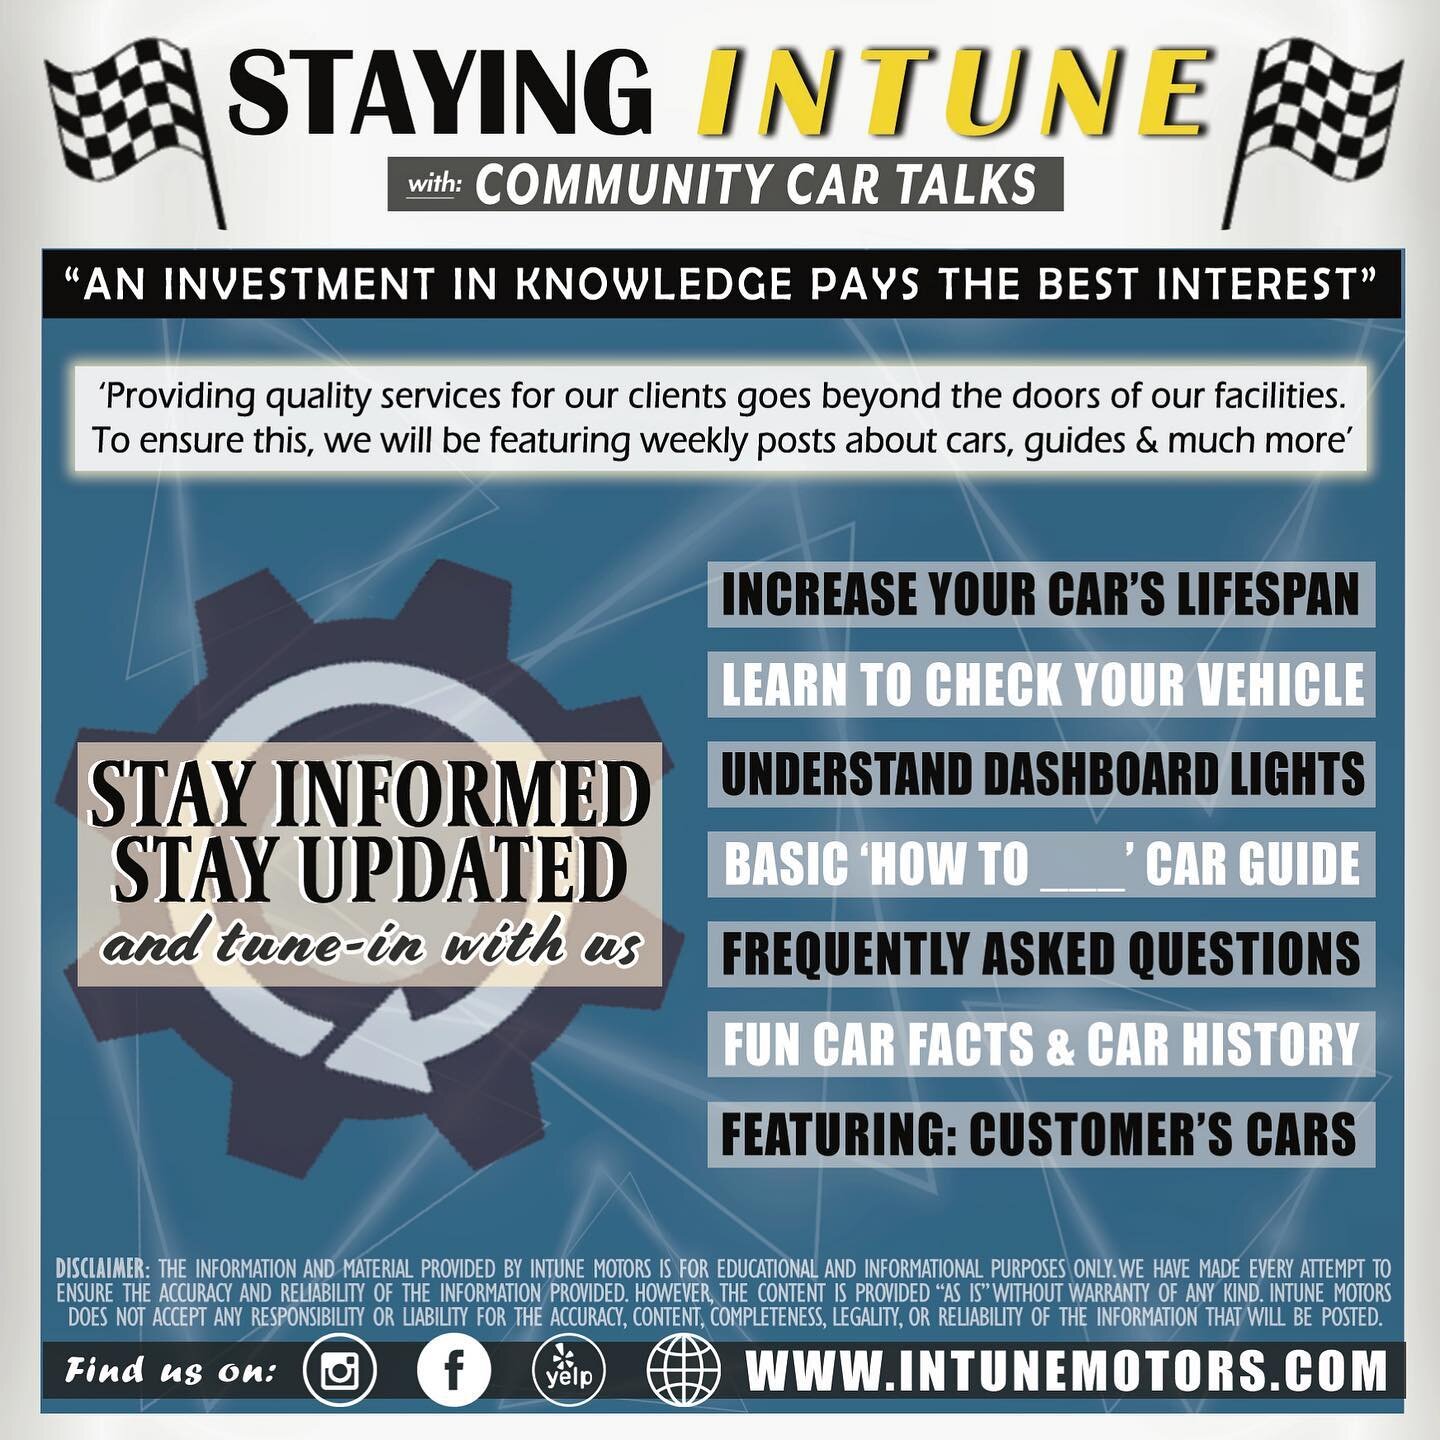 ❗️COMING SOON❗️
Stay Intune for our community car talks! We will be providing information on current news, car care guides &amp; tips, automotive information, latest new tech, fun facts, promotions and much more! 
Staying Intune will be featured on s